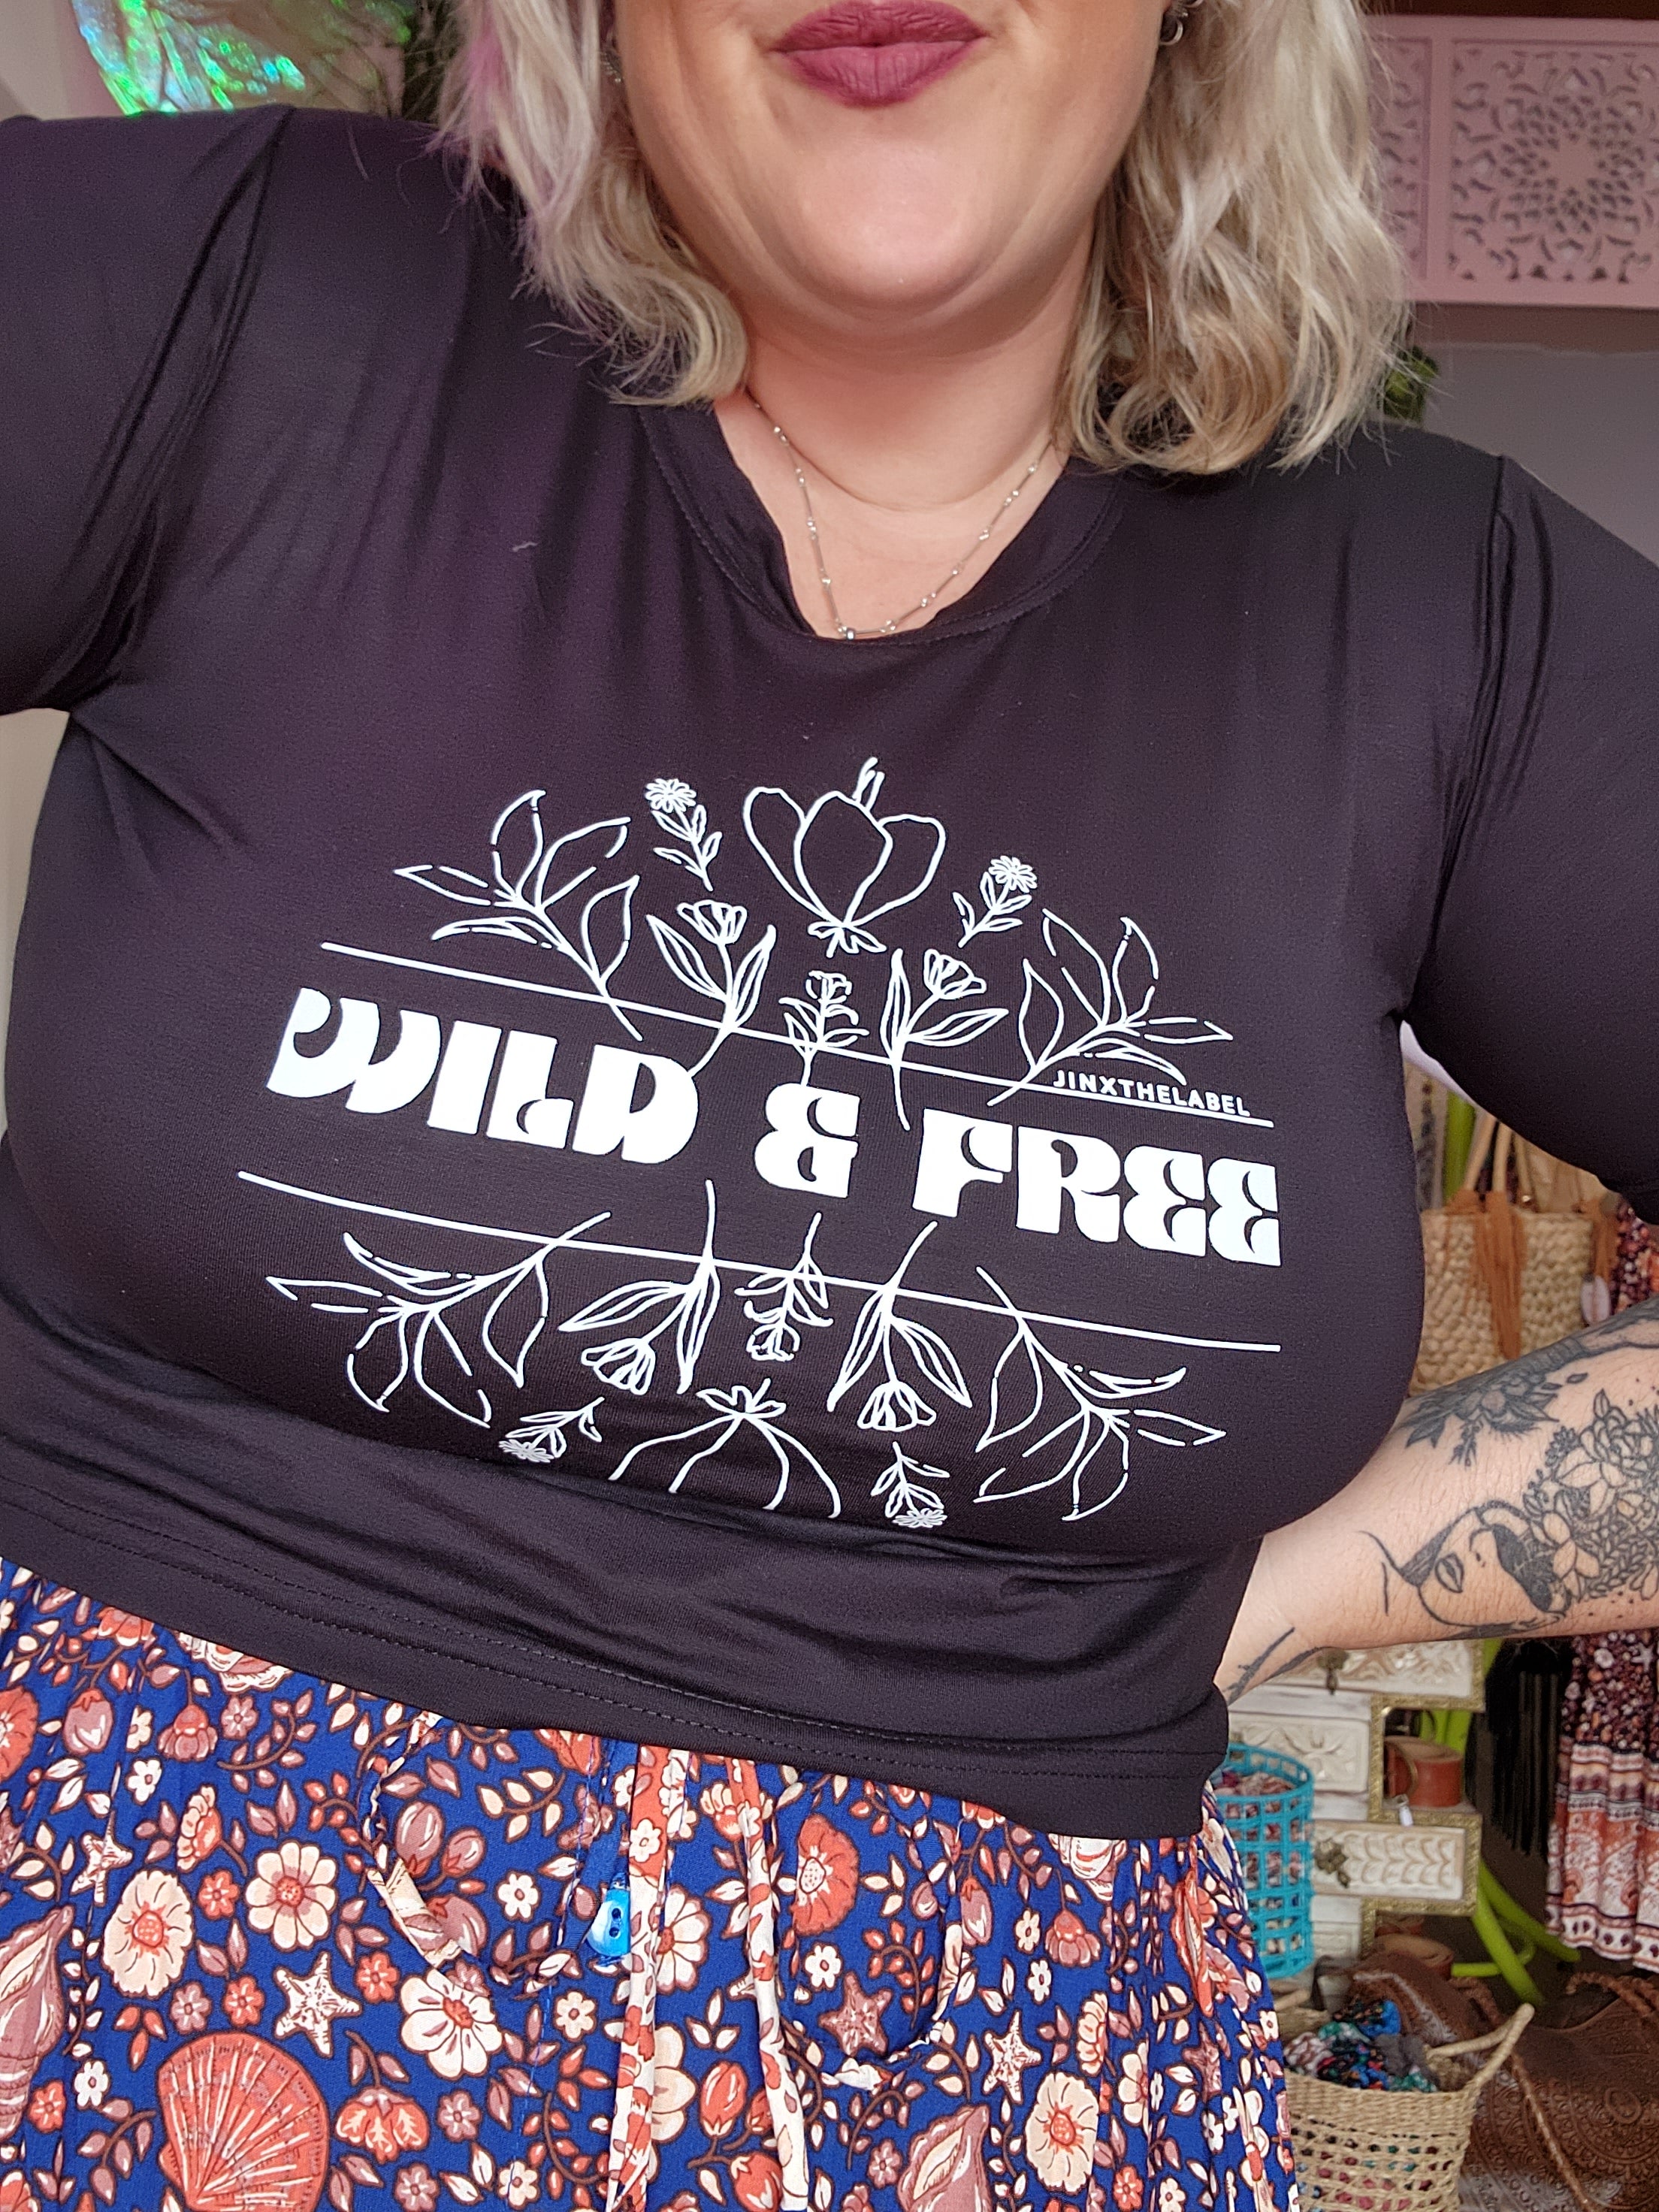 Wild and free crop tee